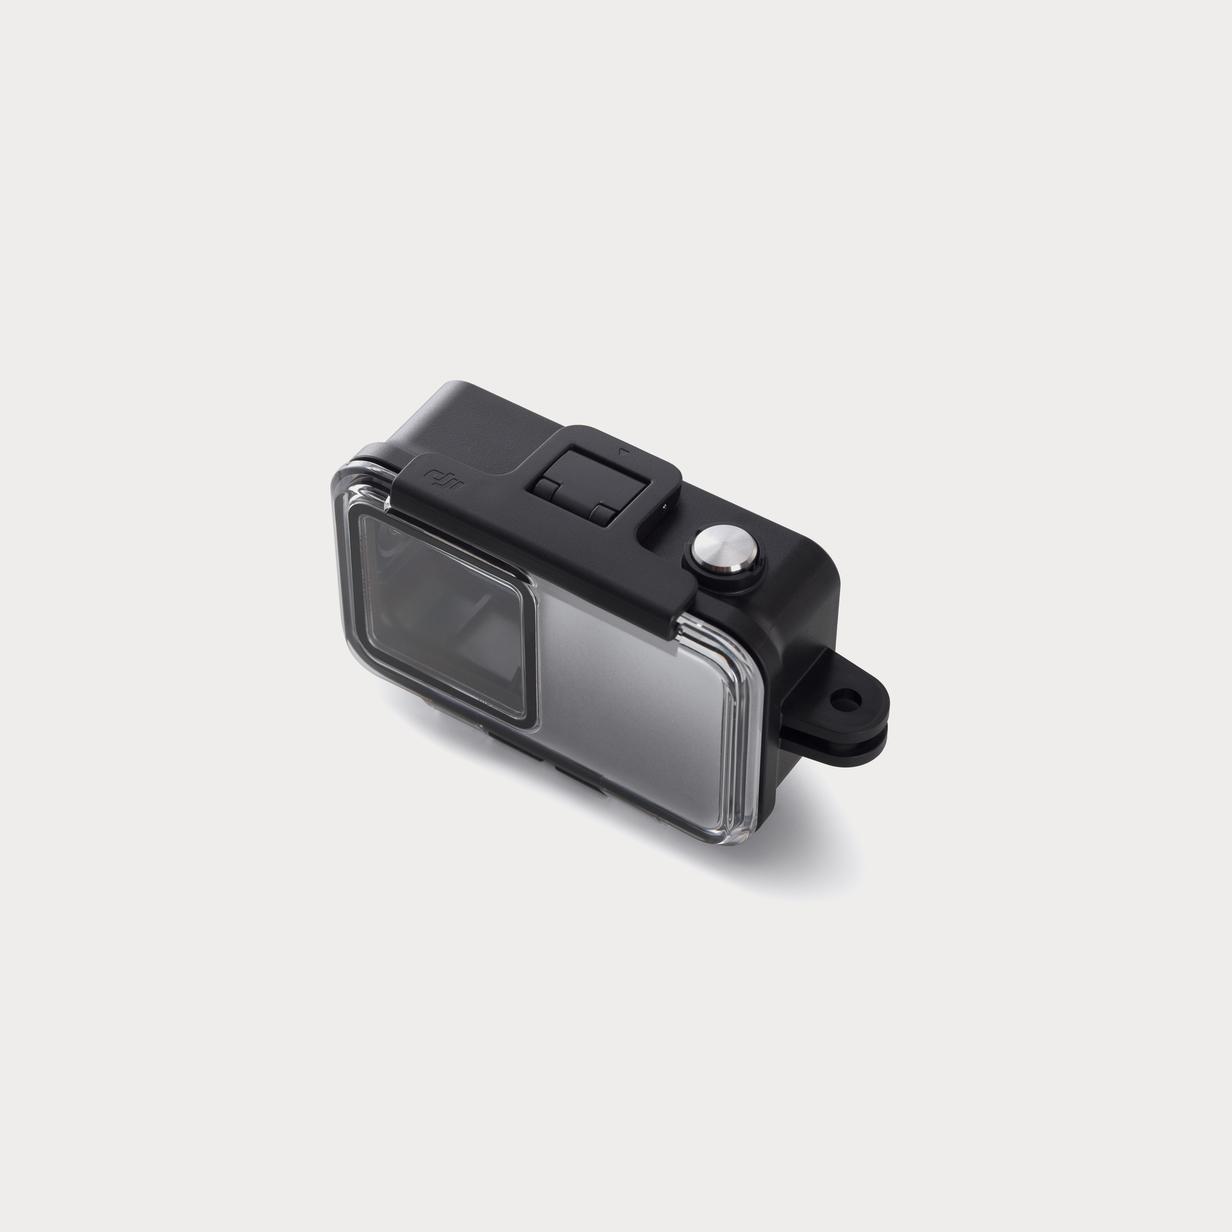 Moment CP OS 00000187 01 DJI Action 2 Waterproof Case 01